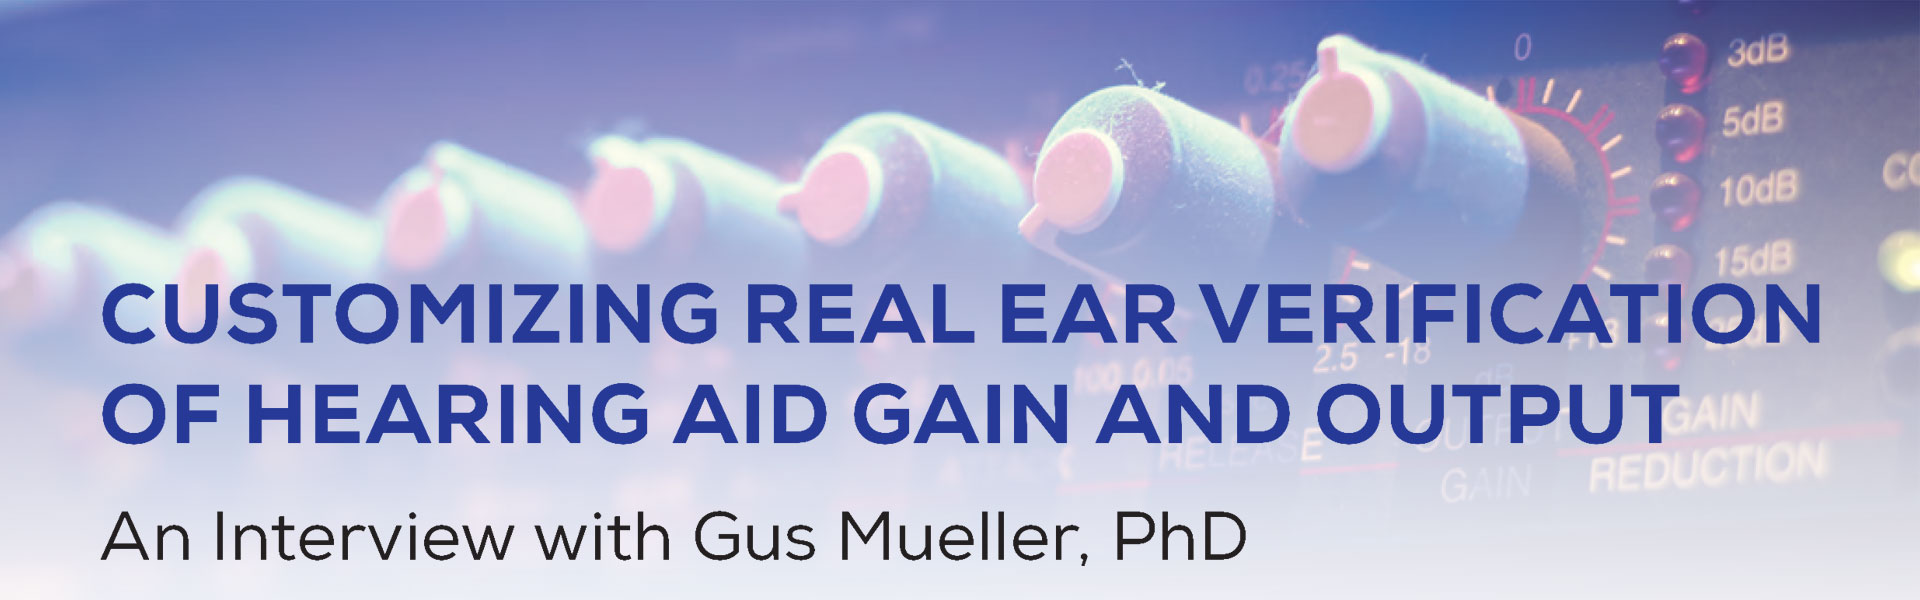 Customizing Real Ear Verification of Hearing Aid Gain and Output